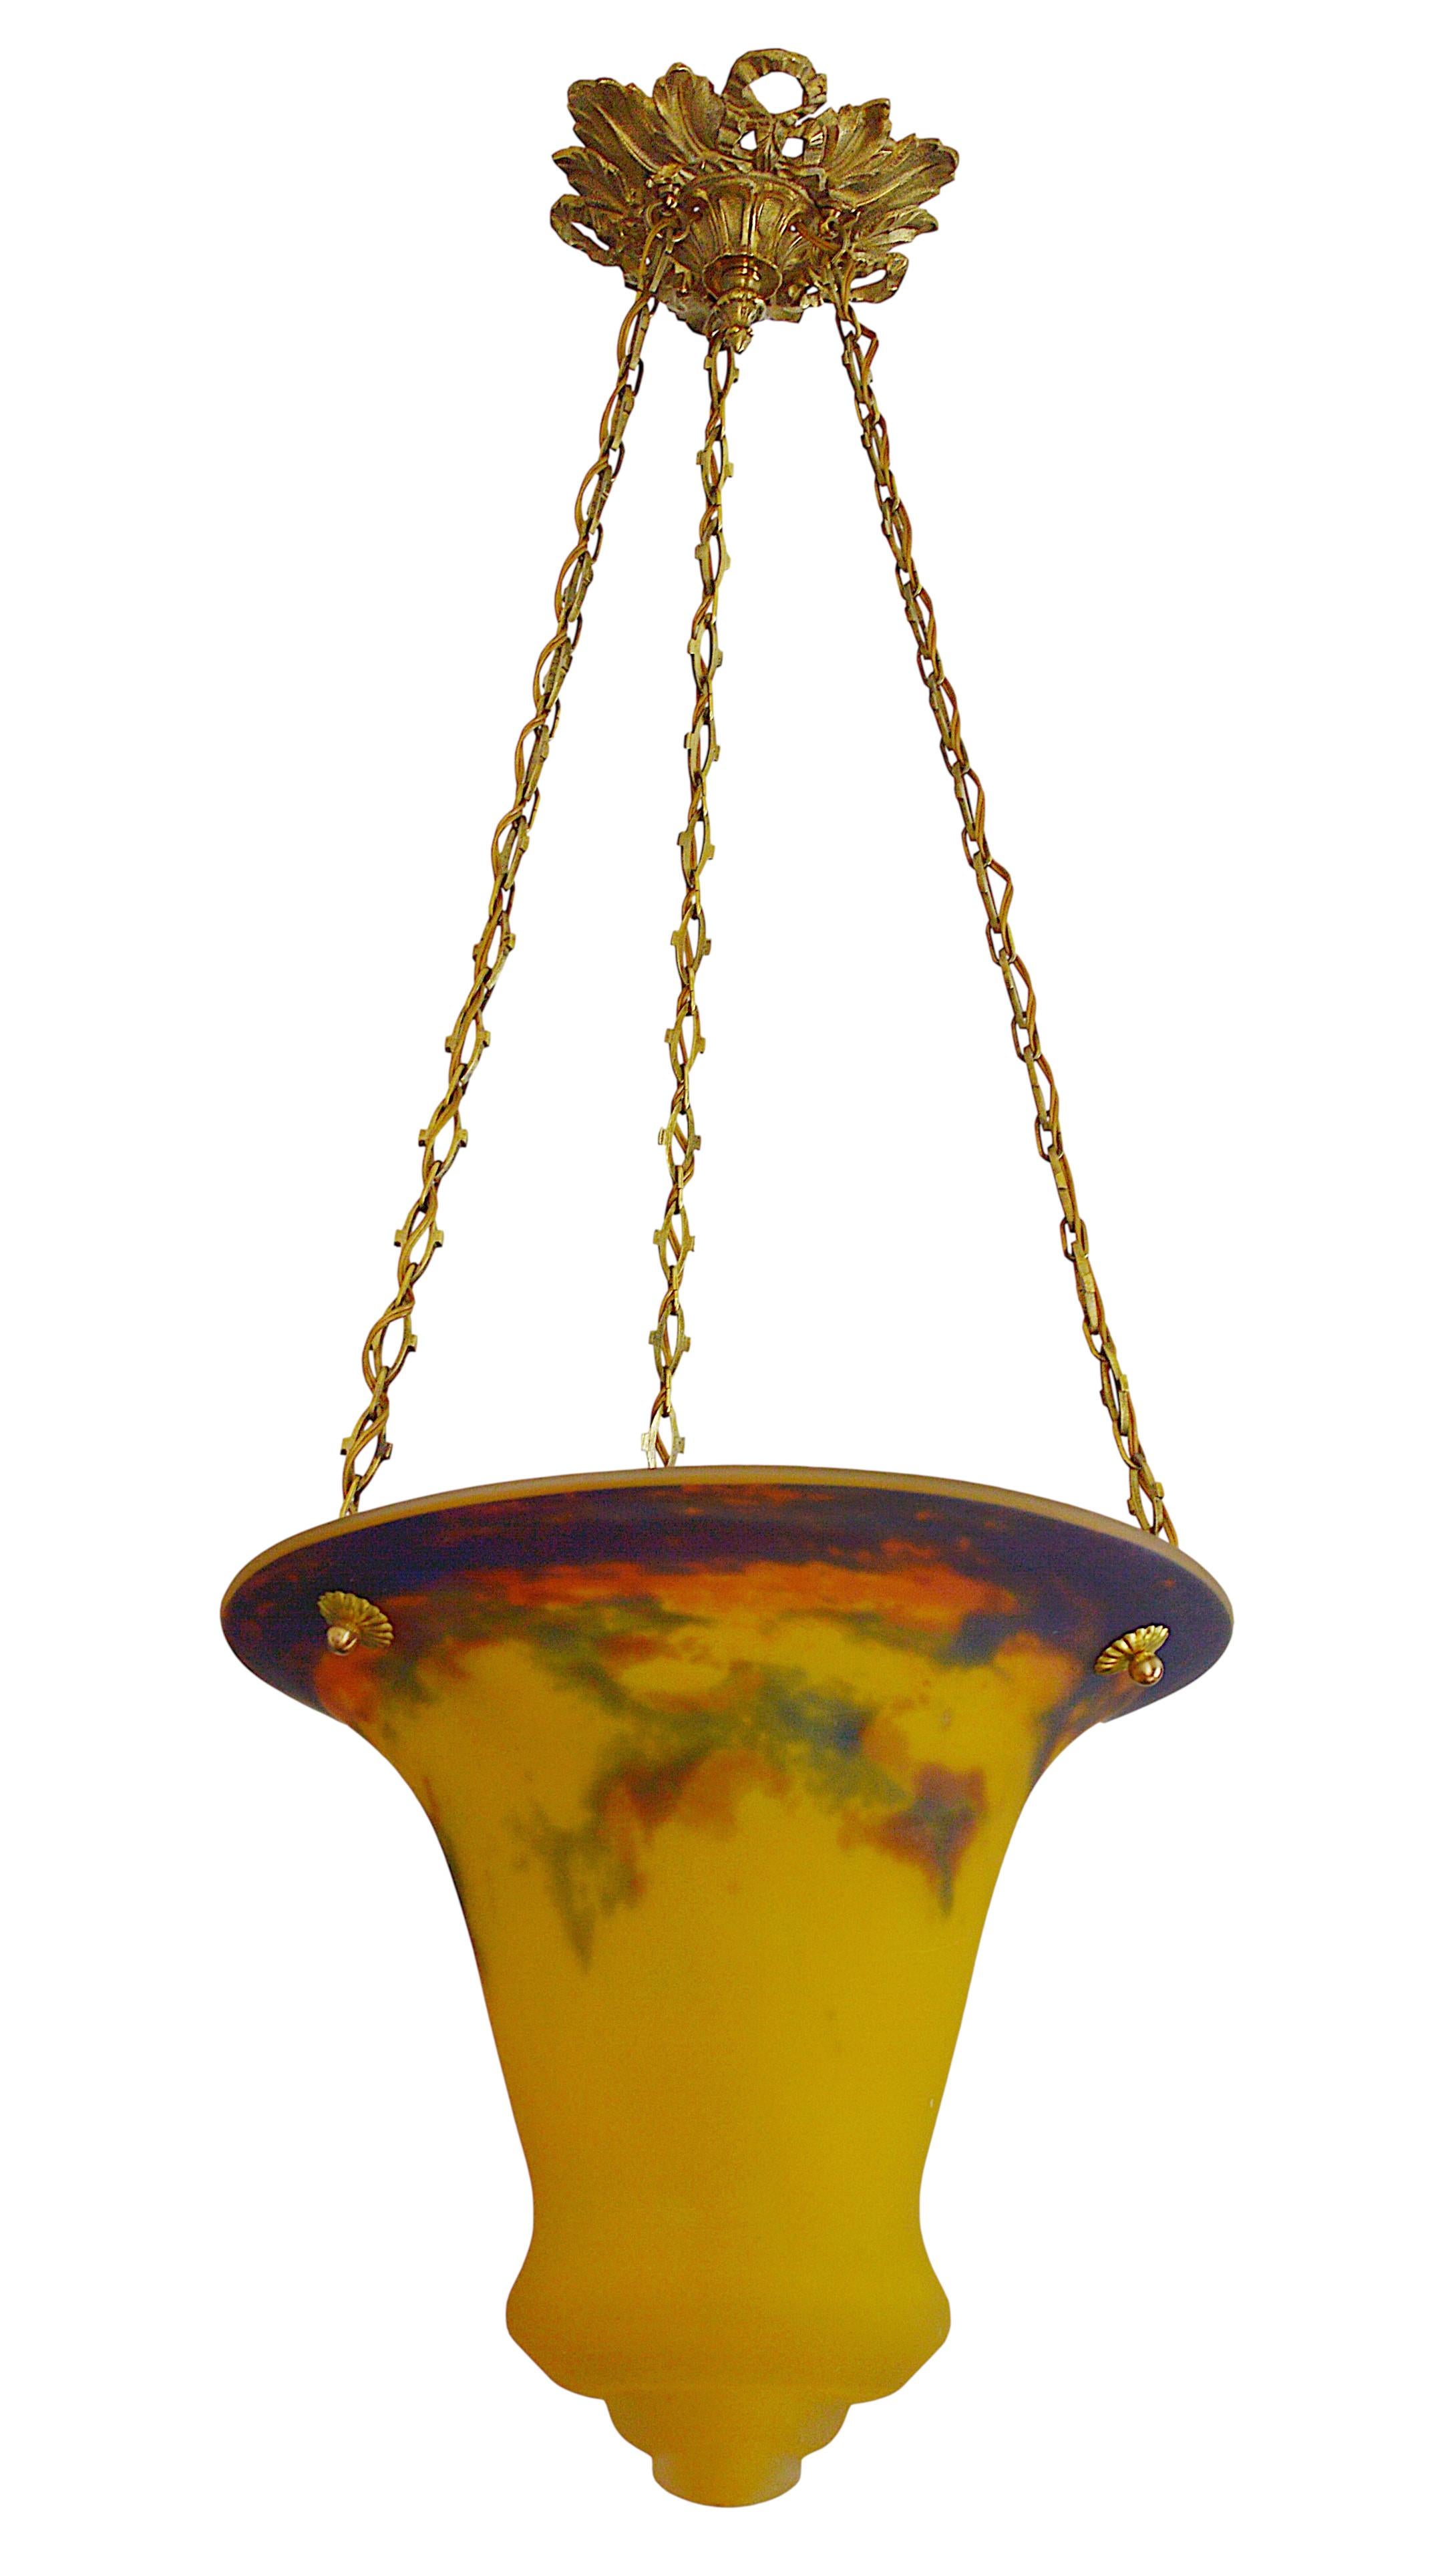 French Art Deco pendant by Muller Freres, Luneville, France, 1920s. Mottled glass shade, rare shape, powders are applied between two layers, that comes hung at its solid bronze fixture. Measures: Height 30